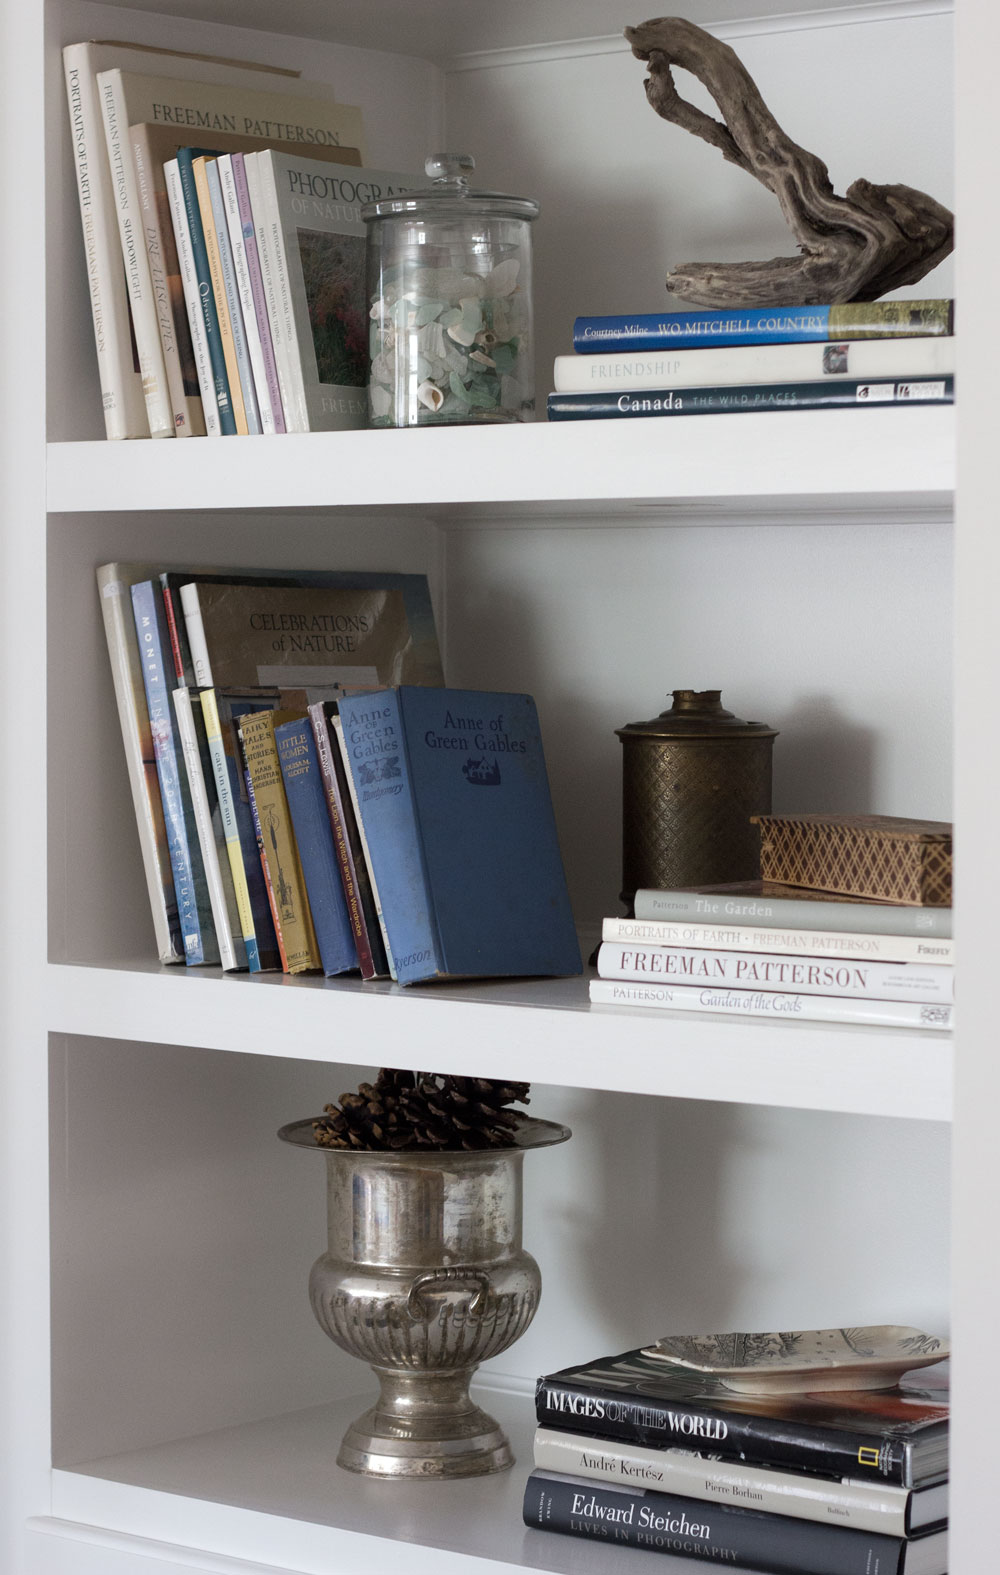 essentialist bookshelf styling - adding meaning and joy without clutter